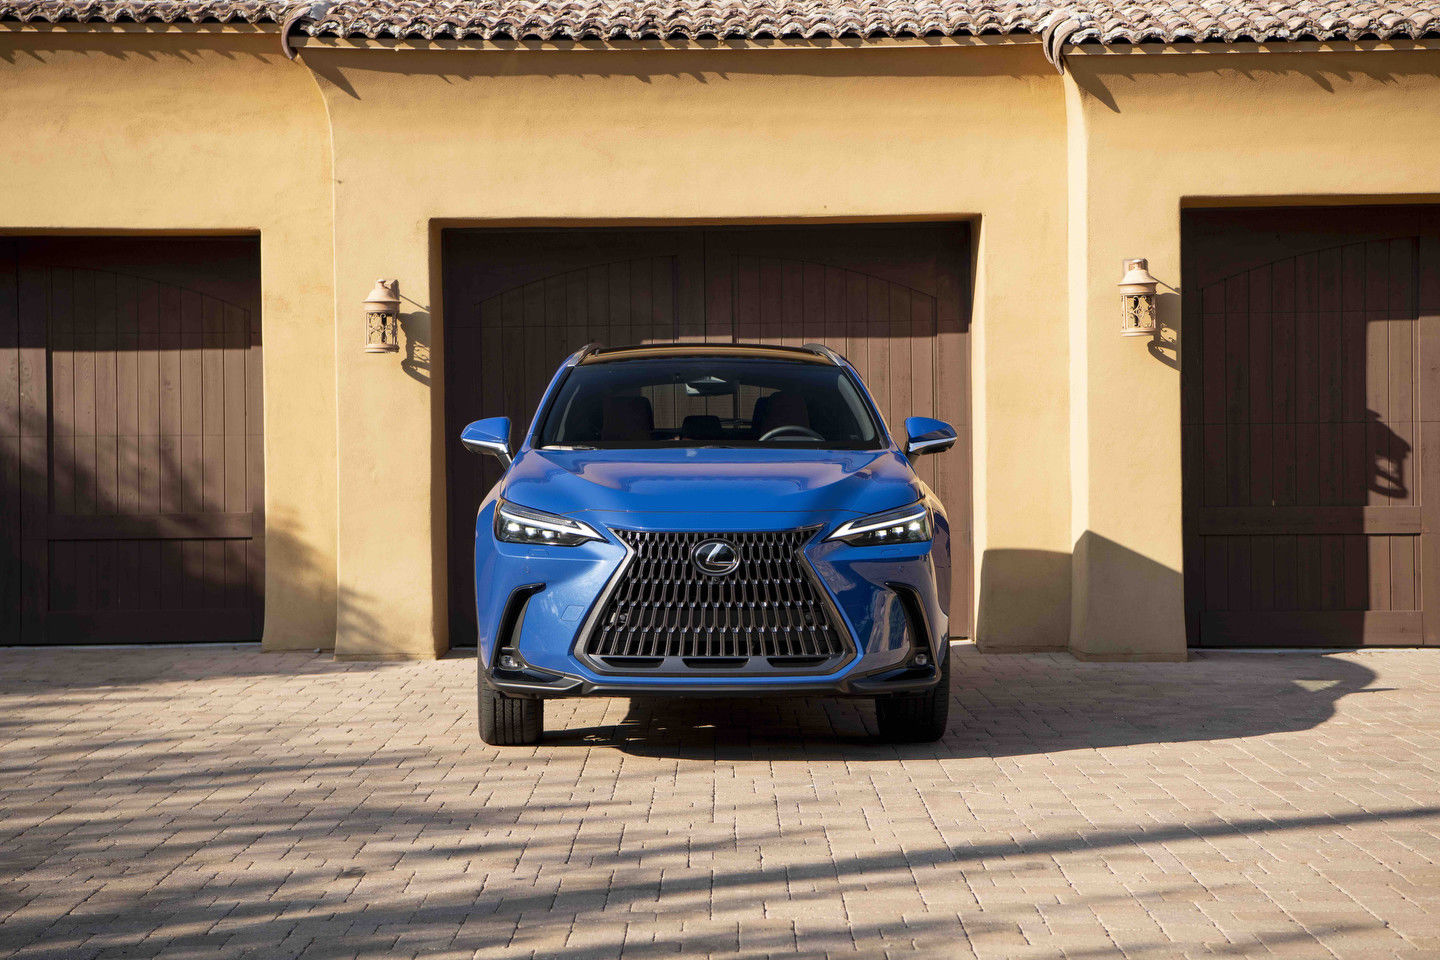 Lexus electrified vehicle sales up 26.5% in 2021